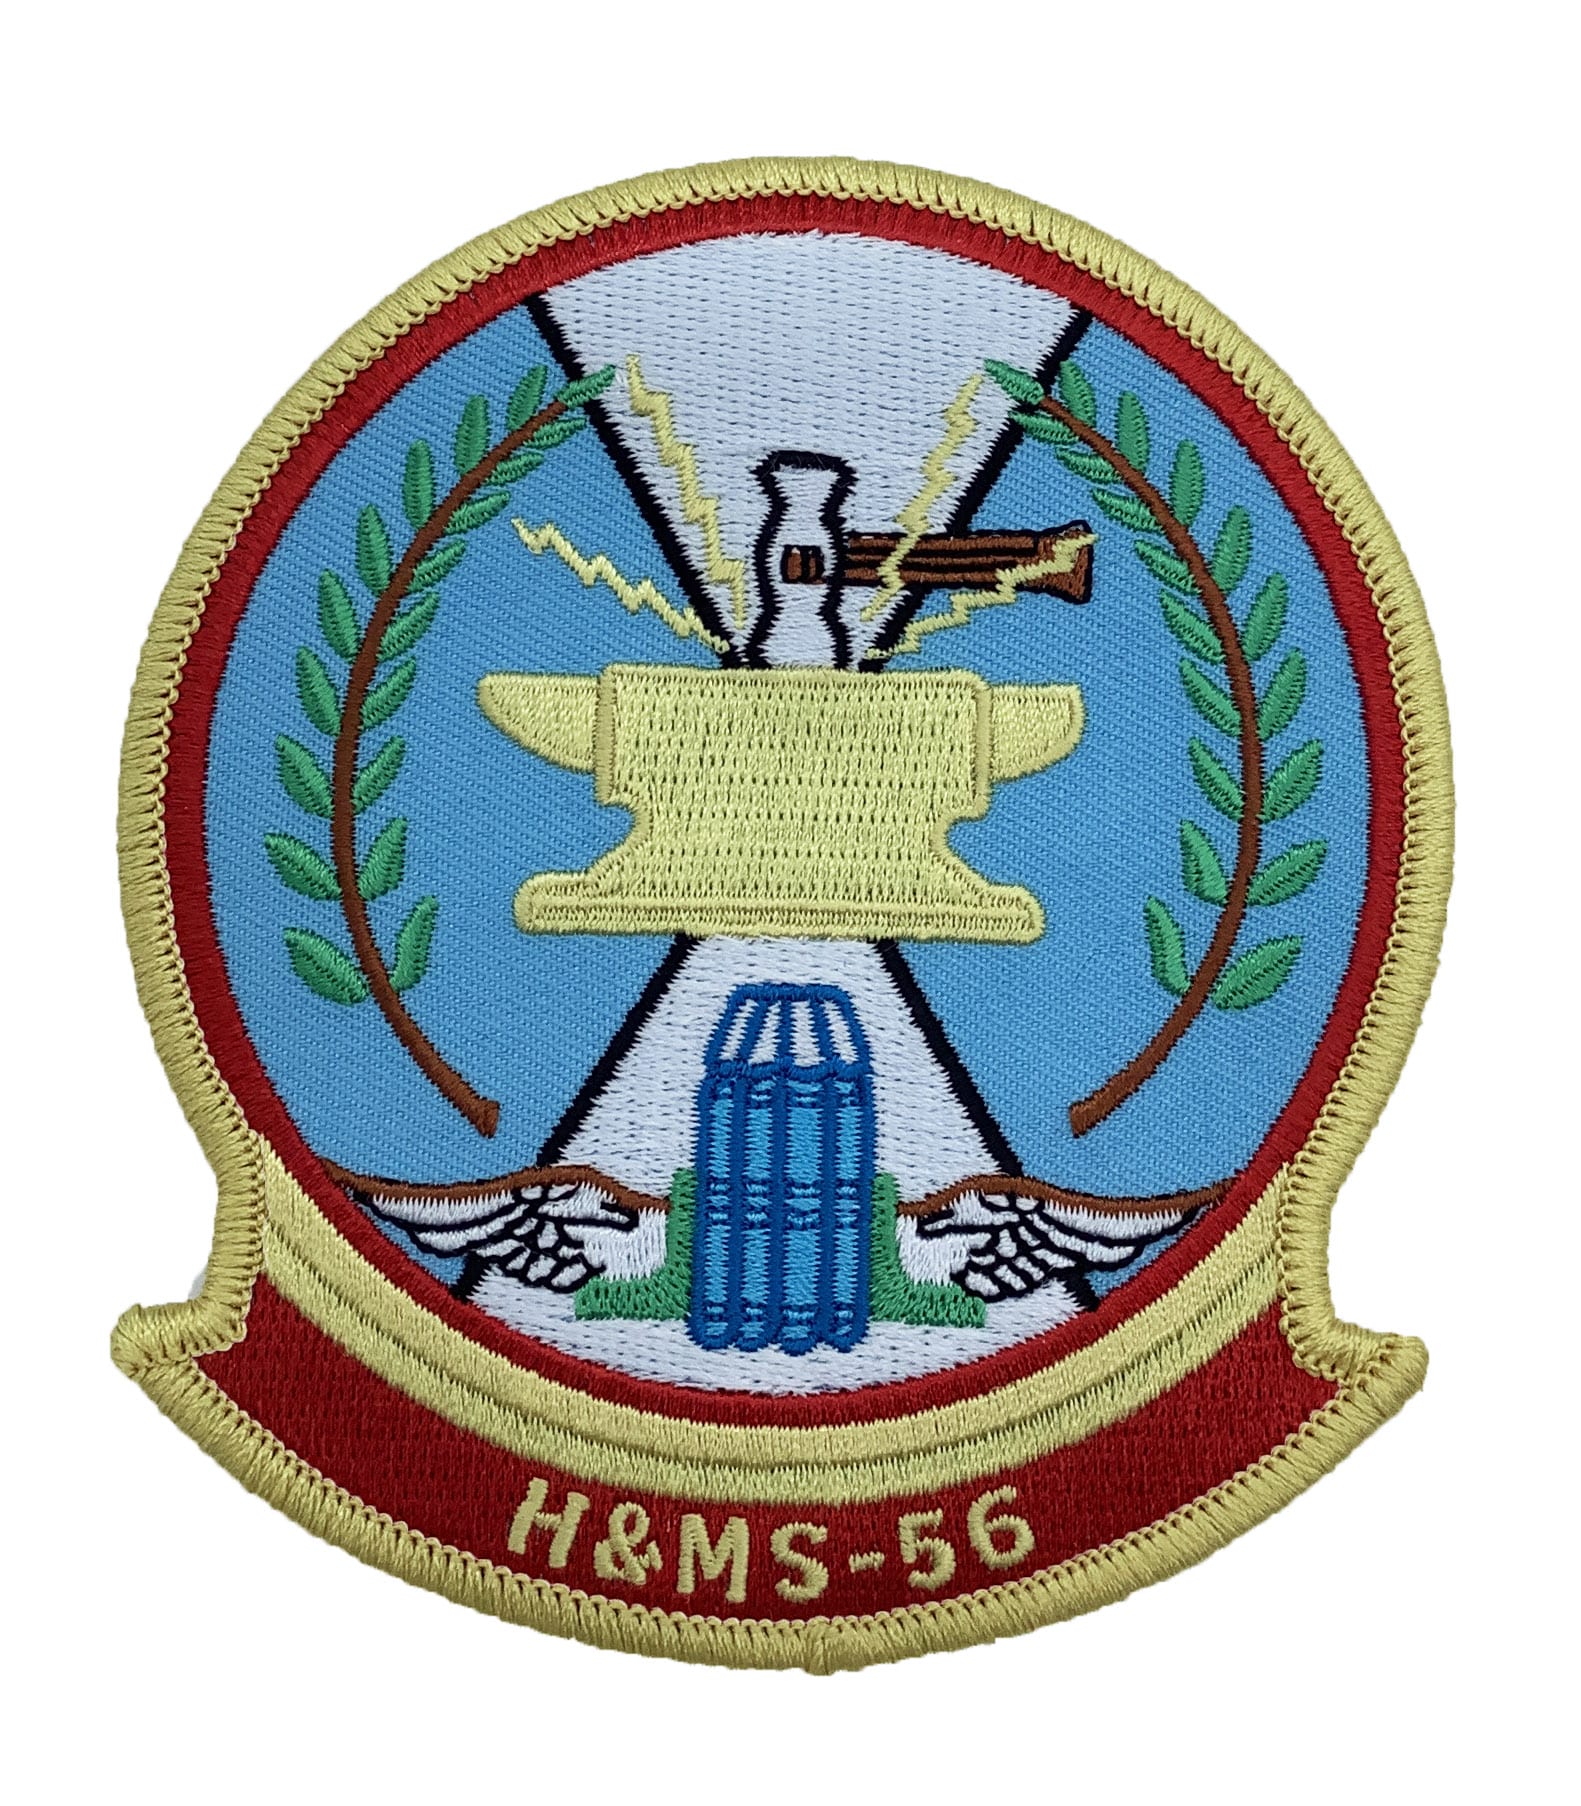 Marine Corps H&MS 56 Patch – No Hook and Loop